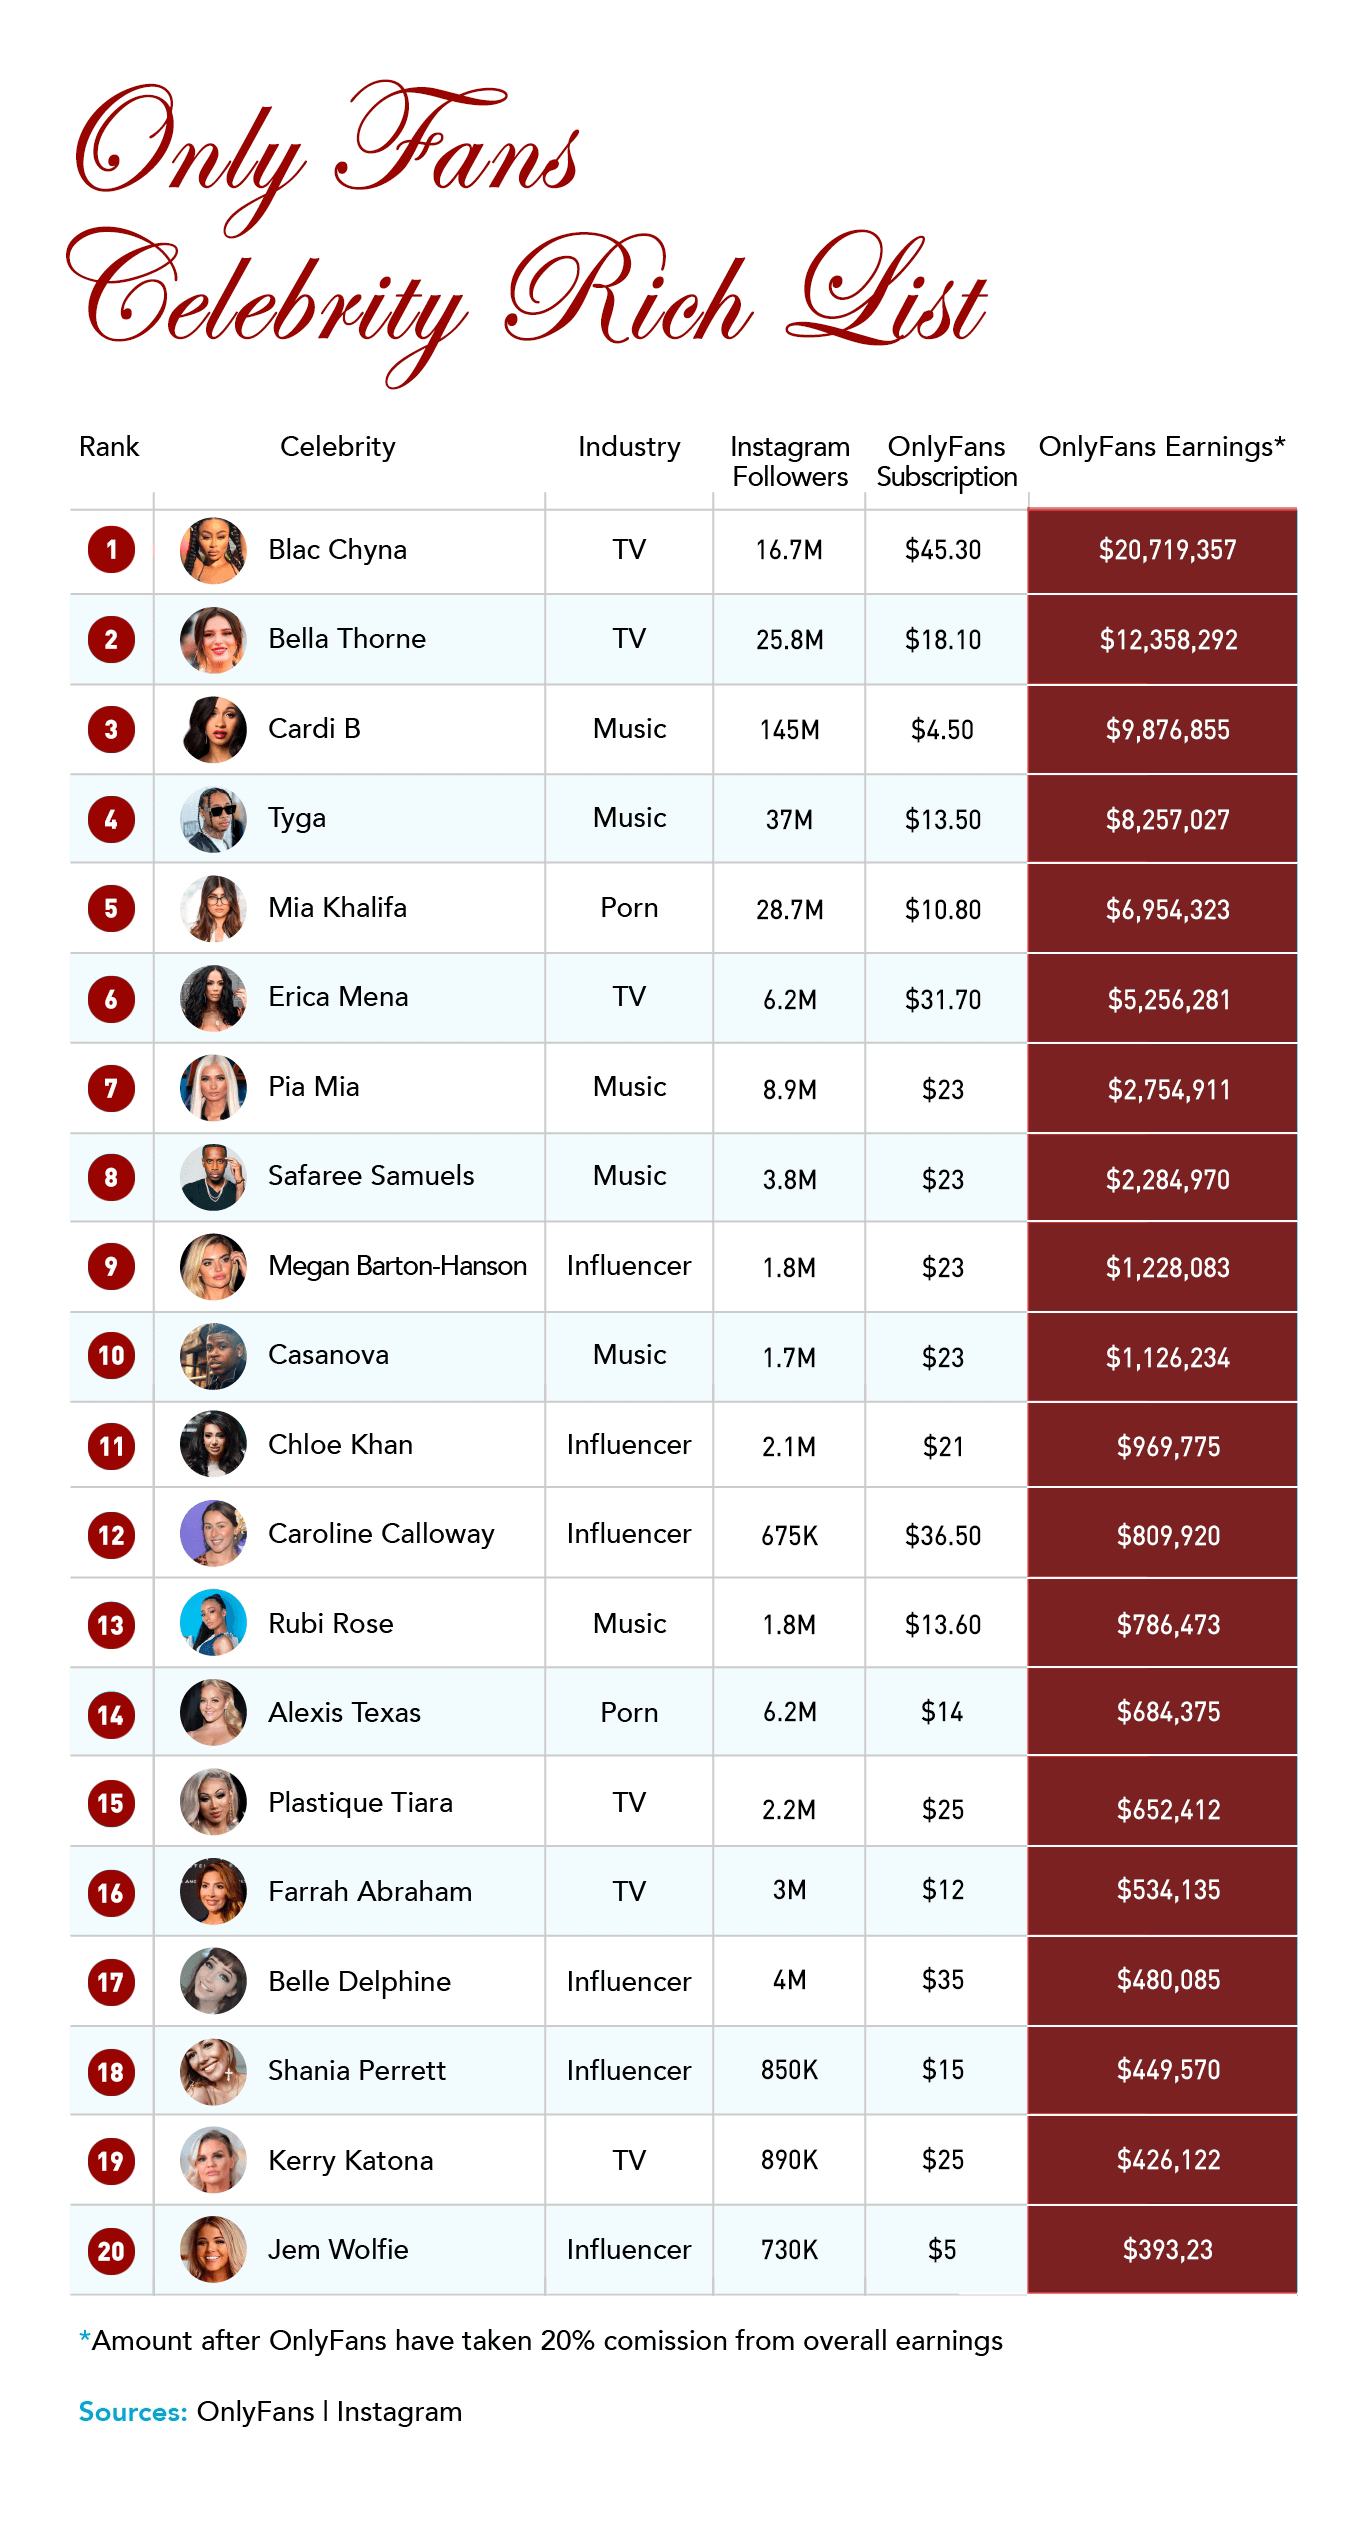 OnlyFans Celebrity Rich List: Top 20 in 2022 to 2023